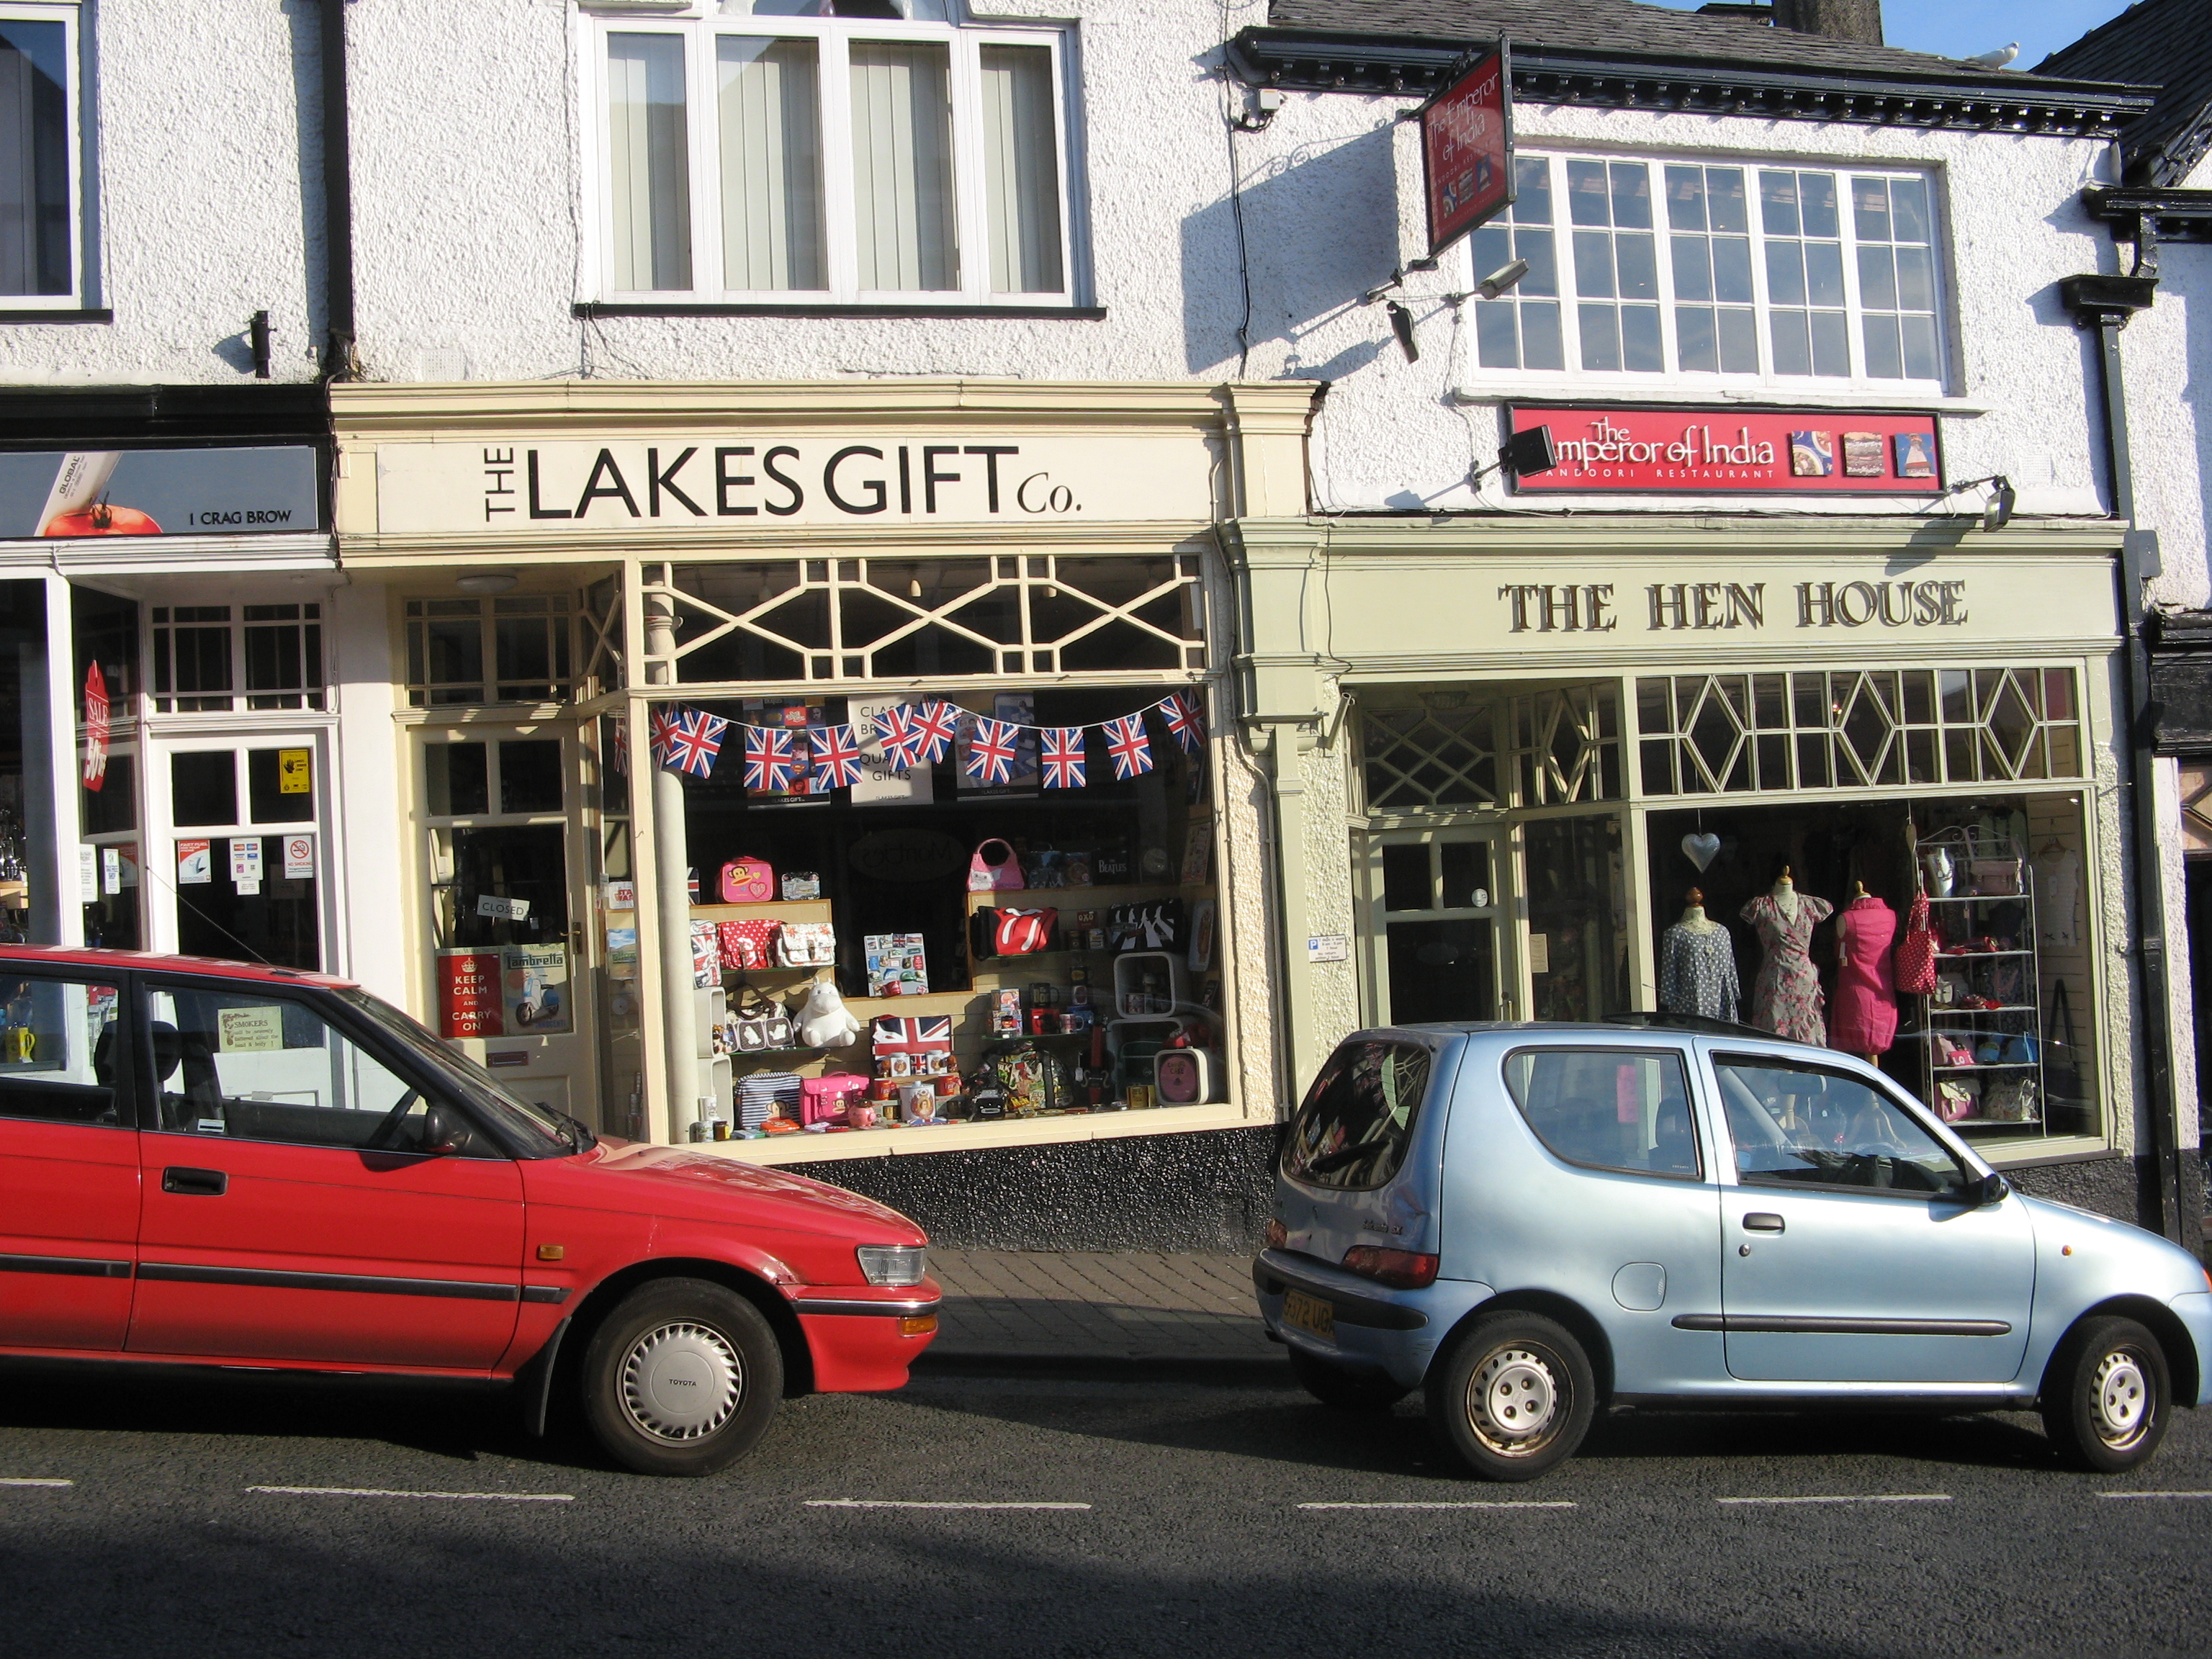 The high street in Bowness-on-Windermere, variously known as Crag Brow, Lake Road etc.